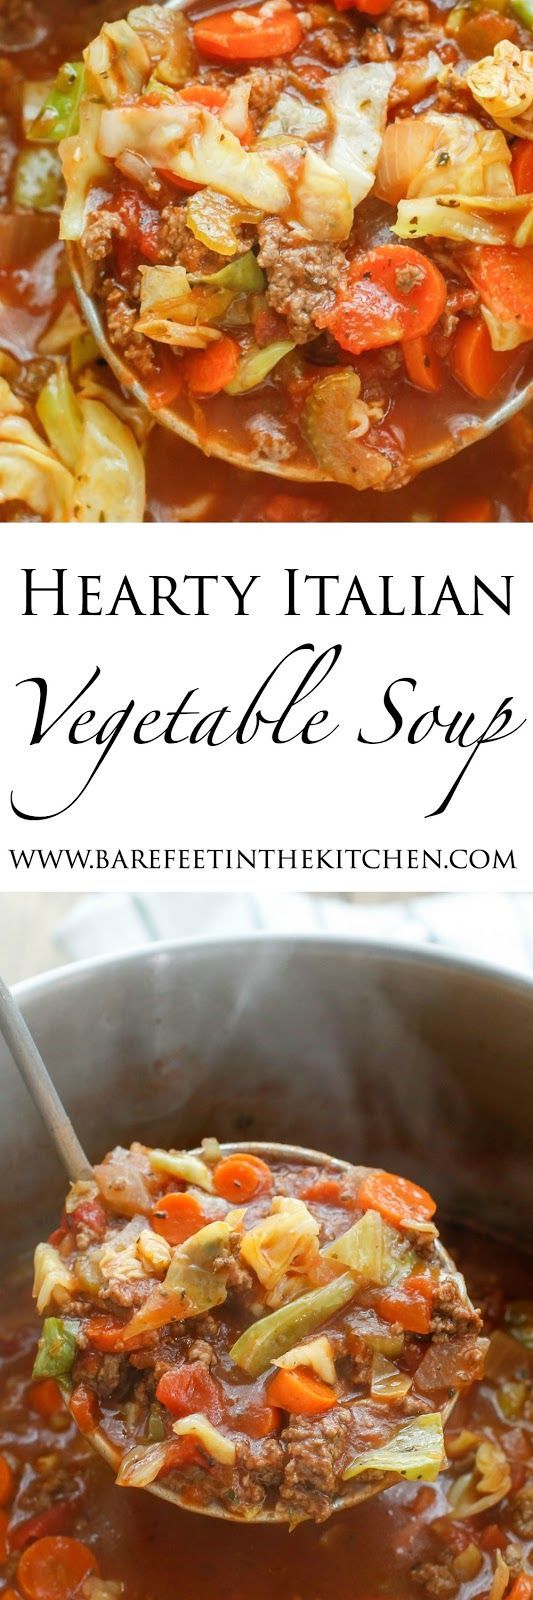 Hearty Italian Vegetable Beef Soup recipe filled with chunks of ground beef, plenty of vegetables, and generous Italian spices,